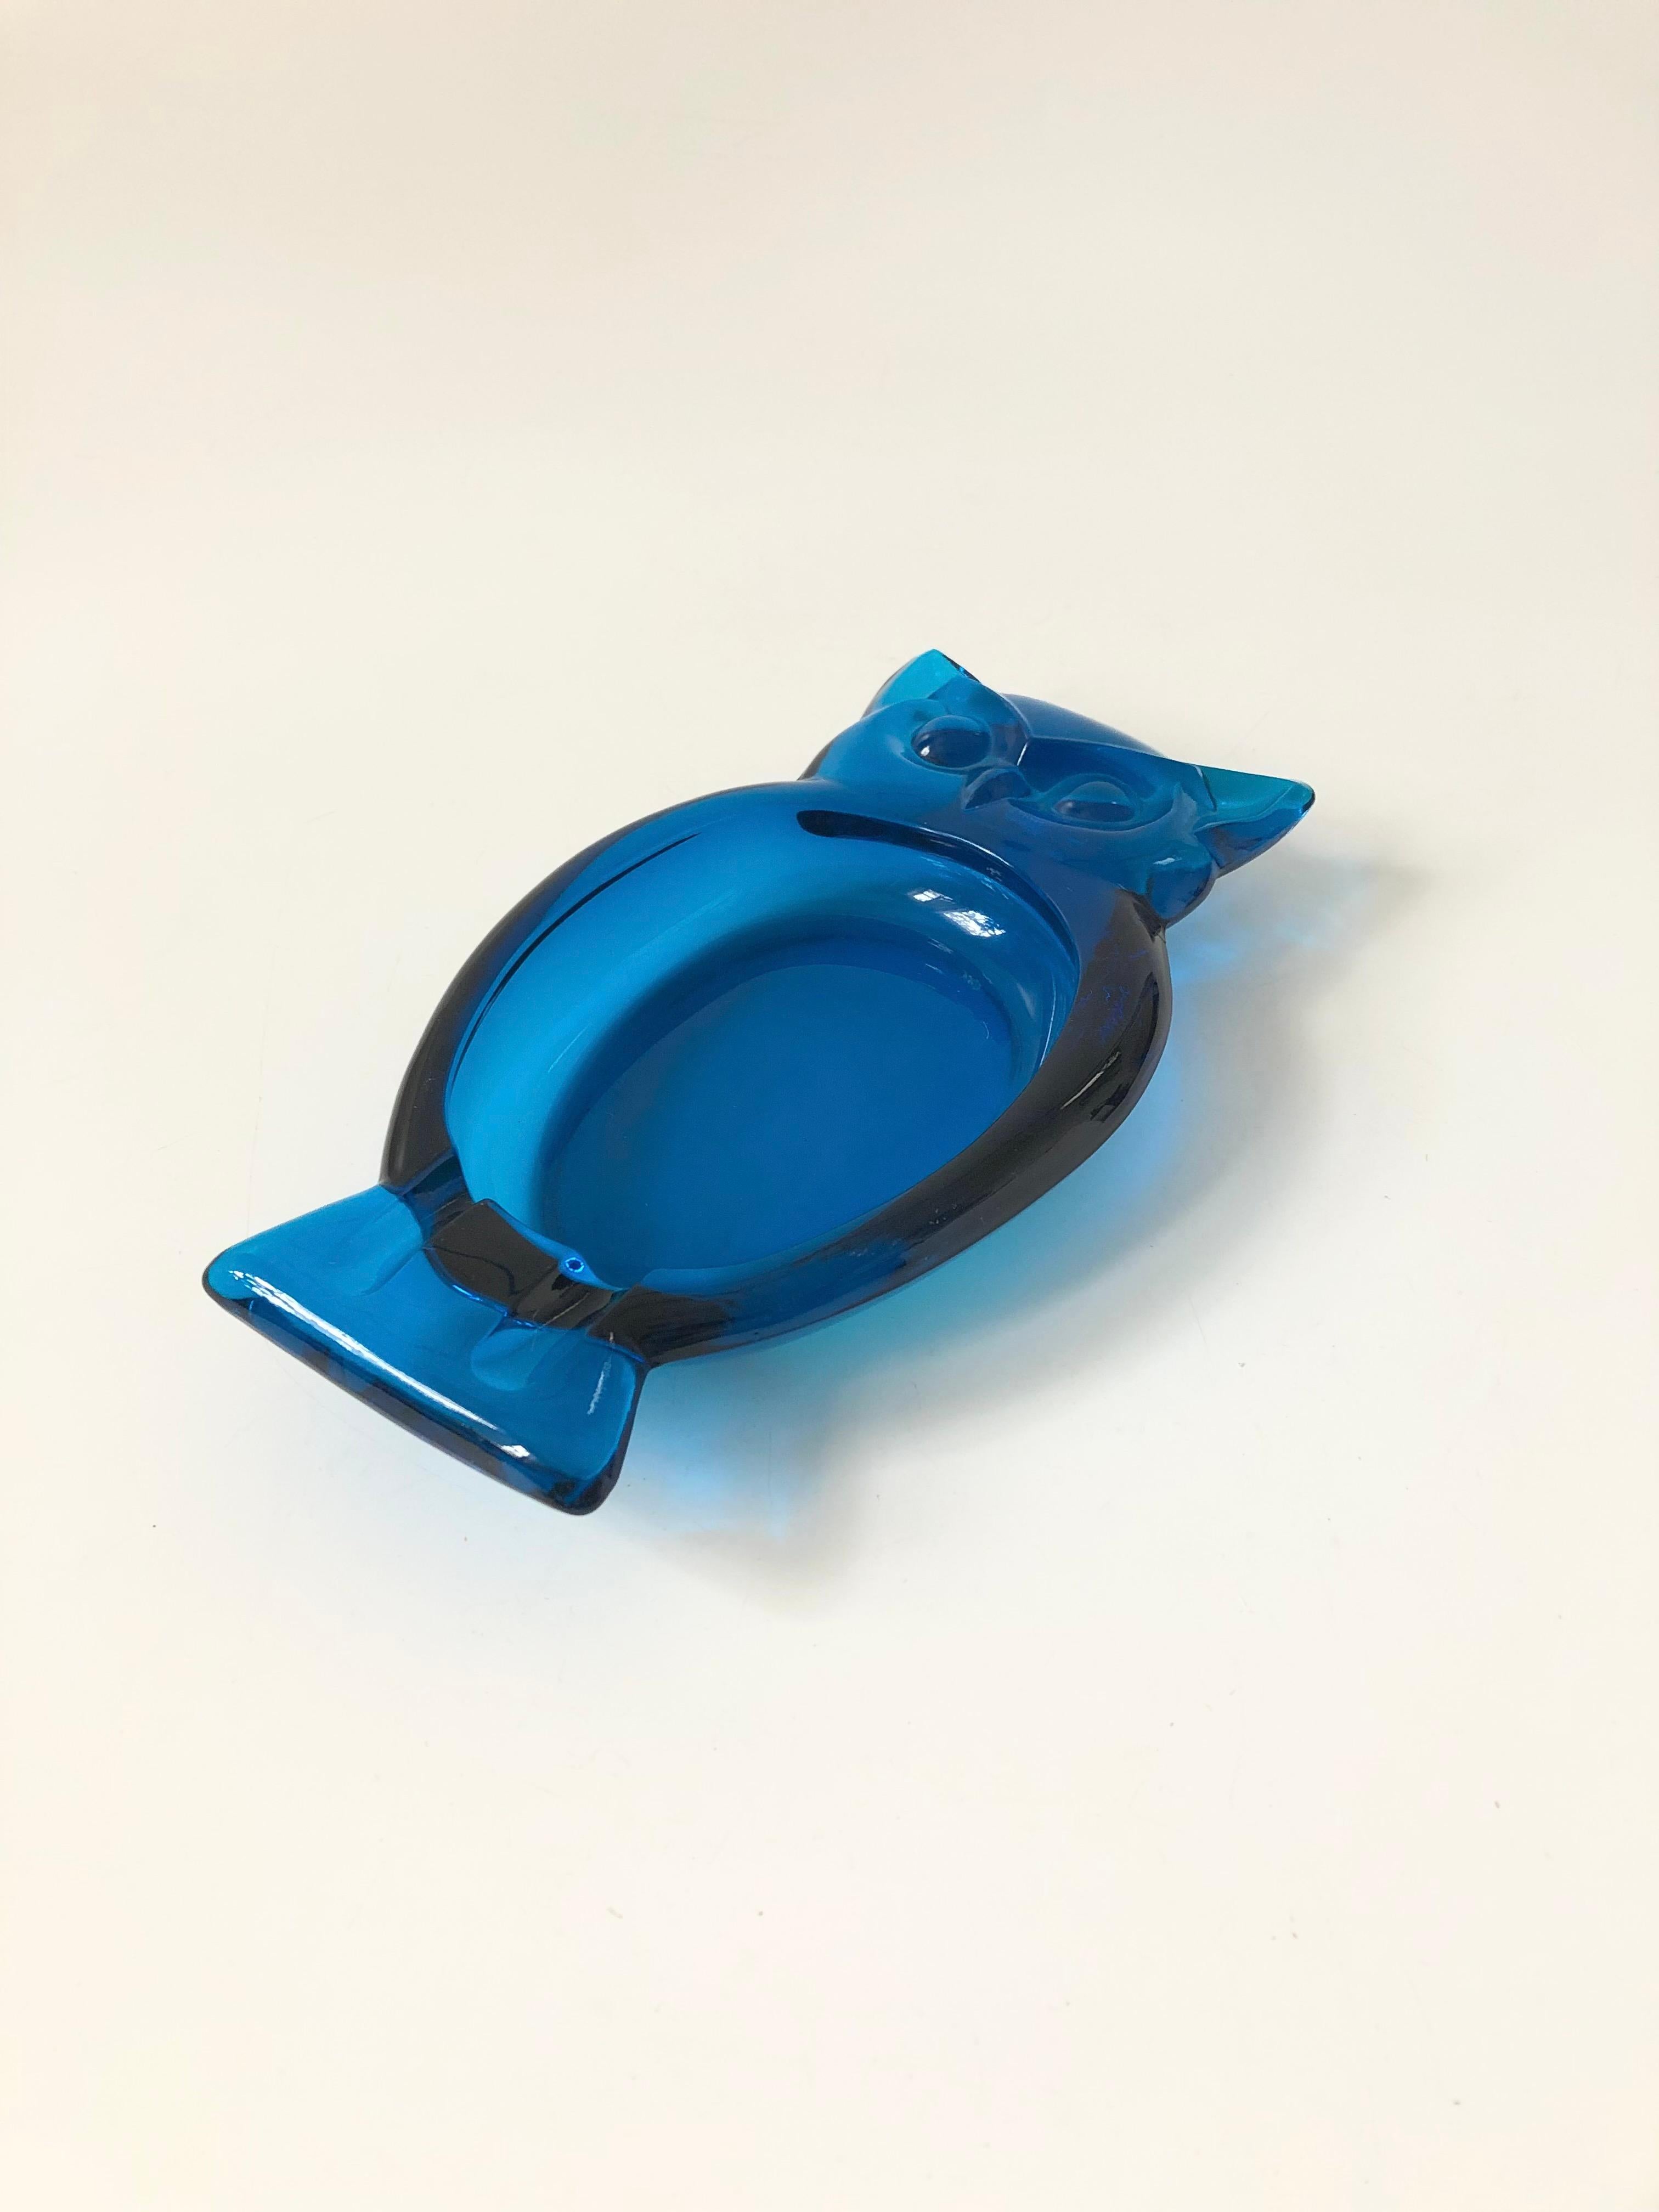 A mid century glass ashtray in the shape of an owl. Made by Viking glass in a vibrant blue color. Nice larger size, perfect for using as a catch all tray.
  